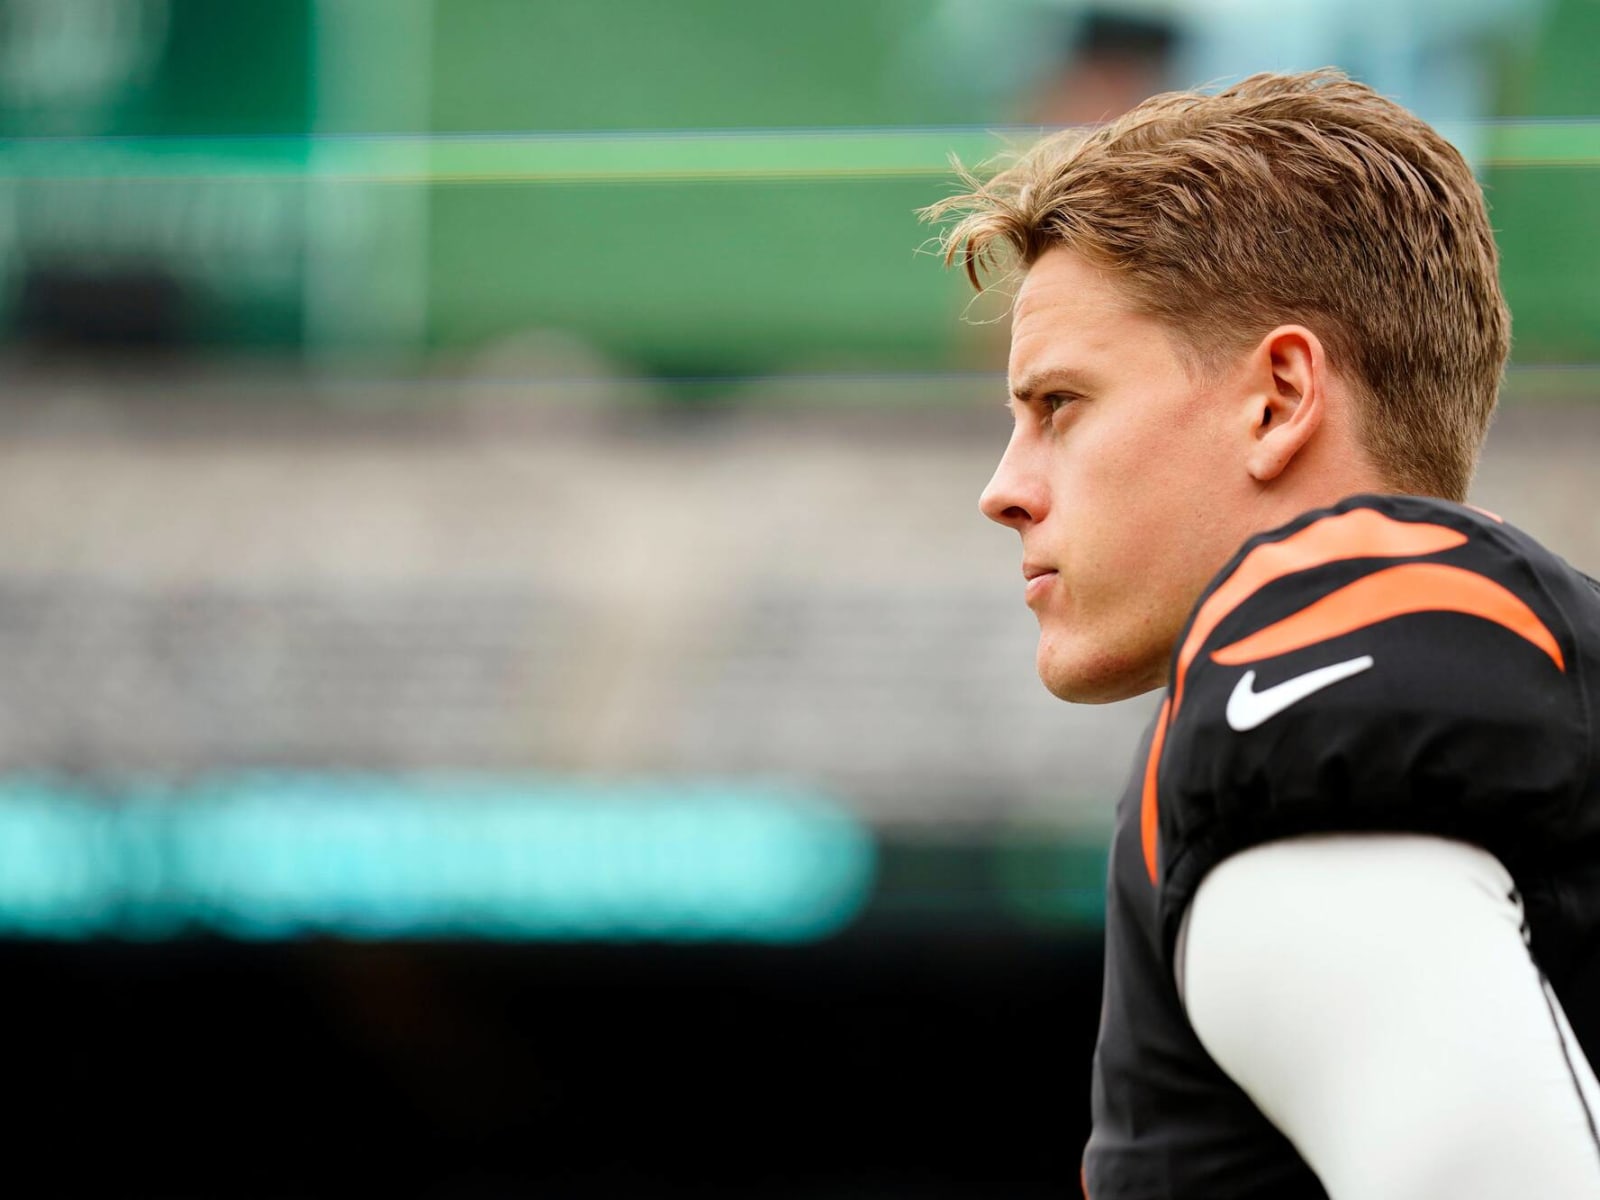 Joe Burrow Bengals jerseys are already out in the wild